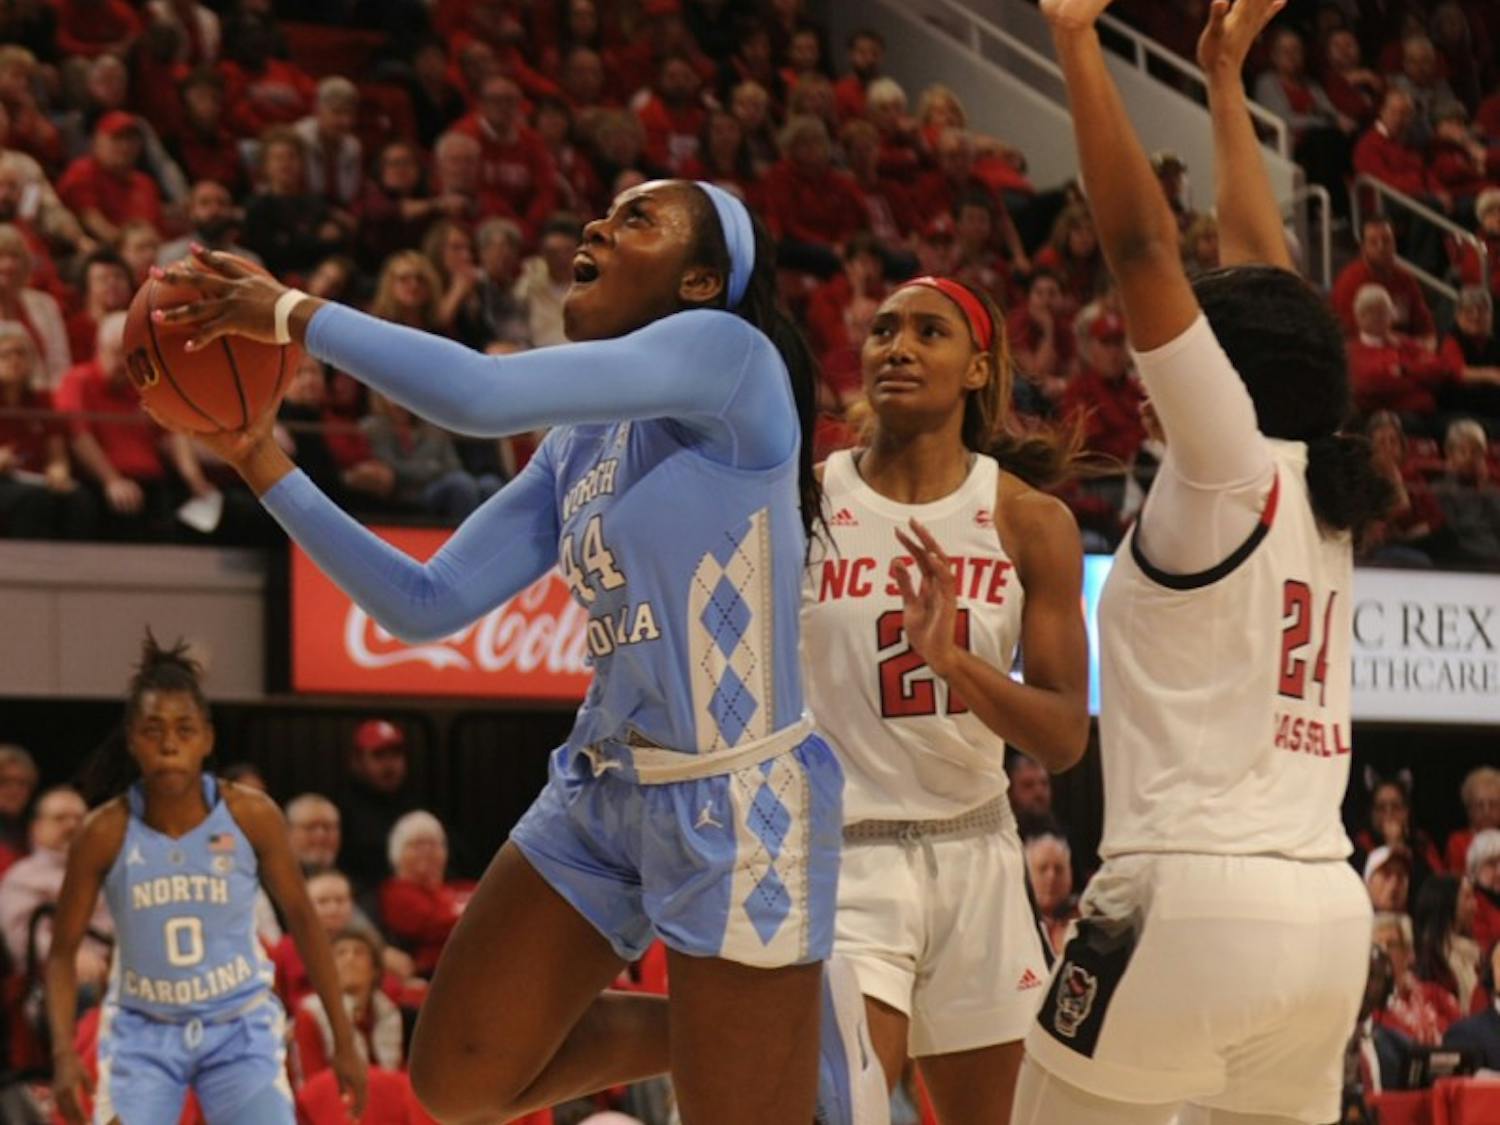 womens basketball at nc state Janelle Bailey